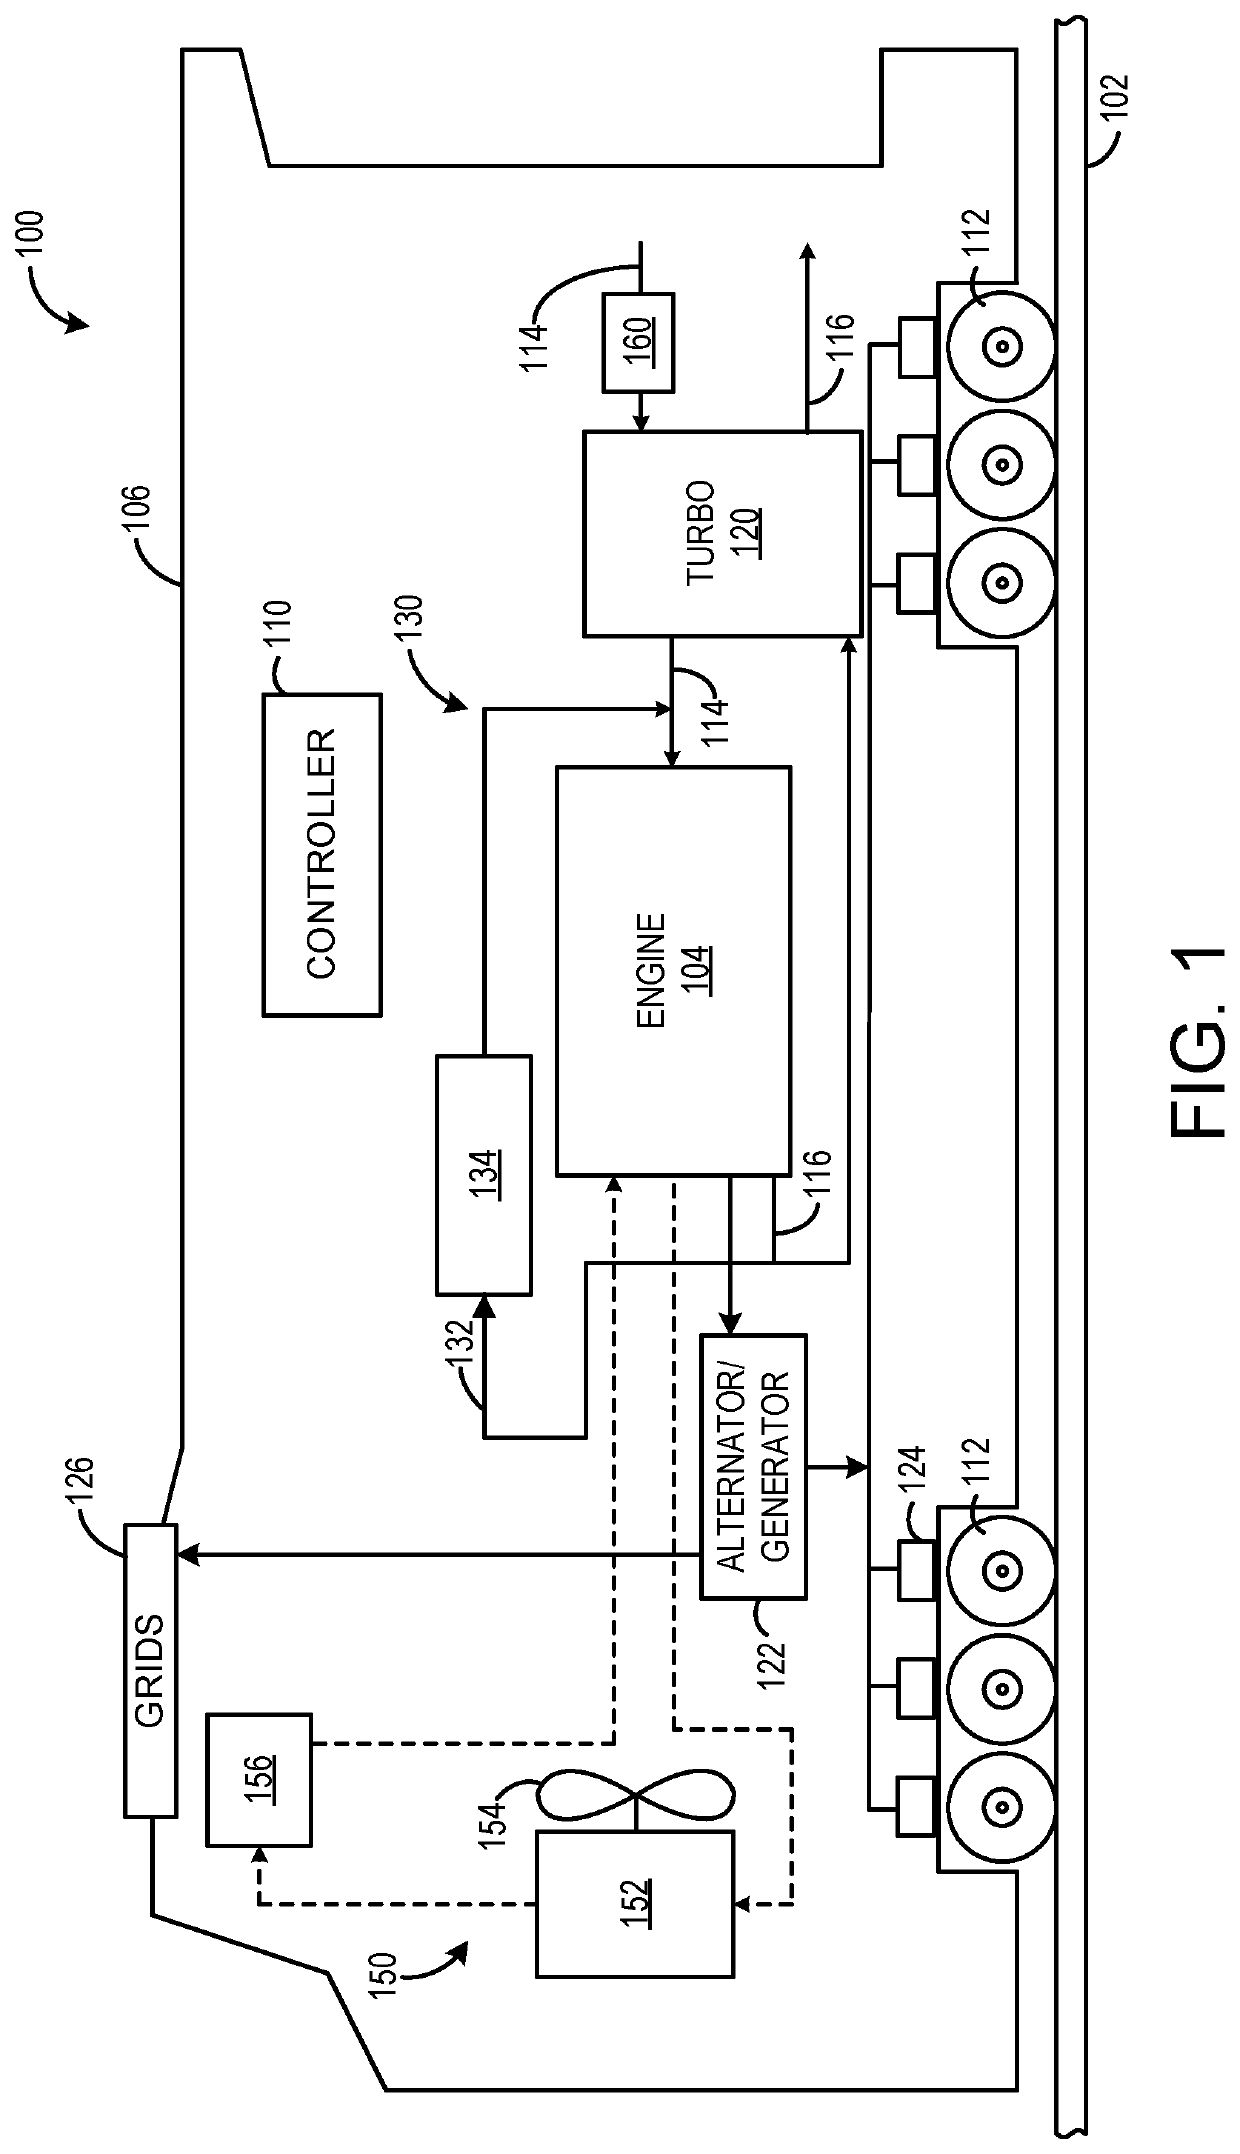 Systems and method for controlling auto-ignition